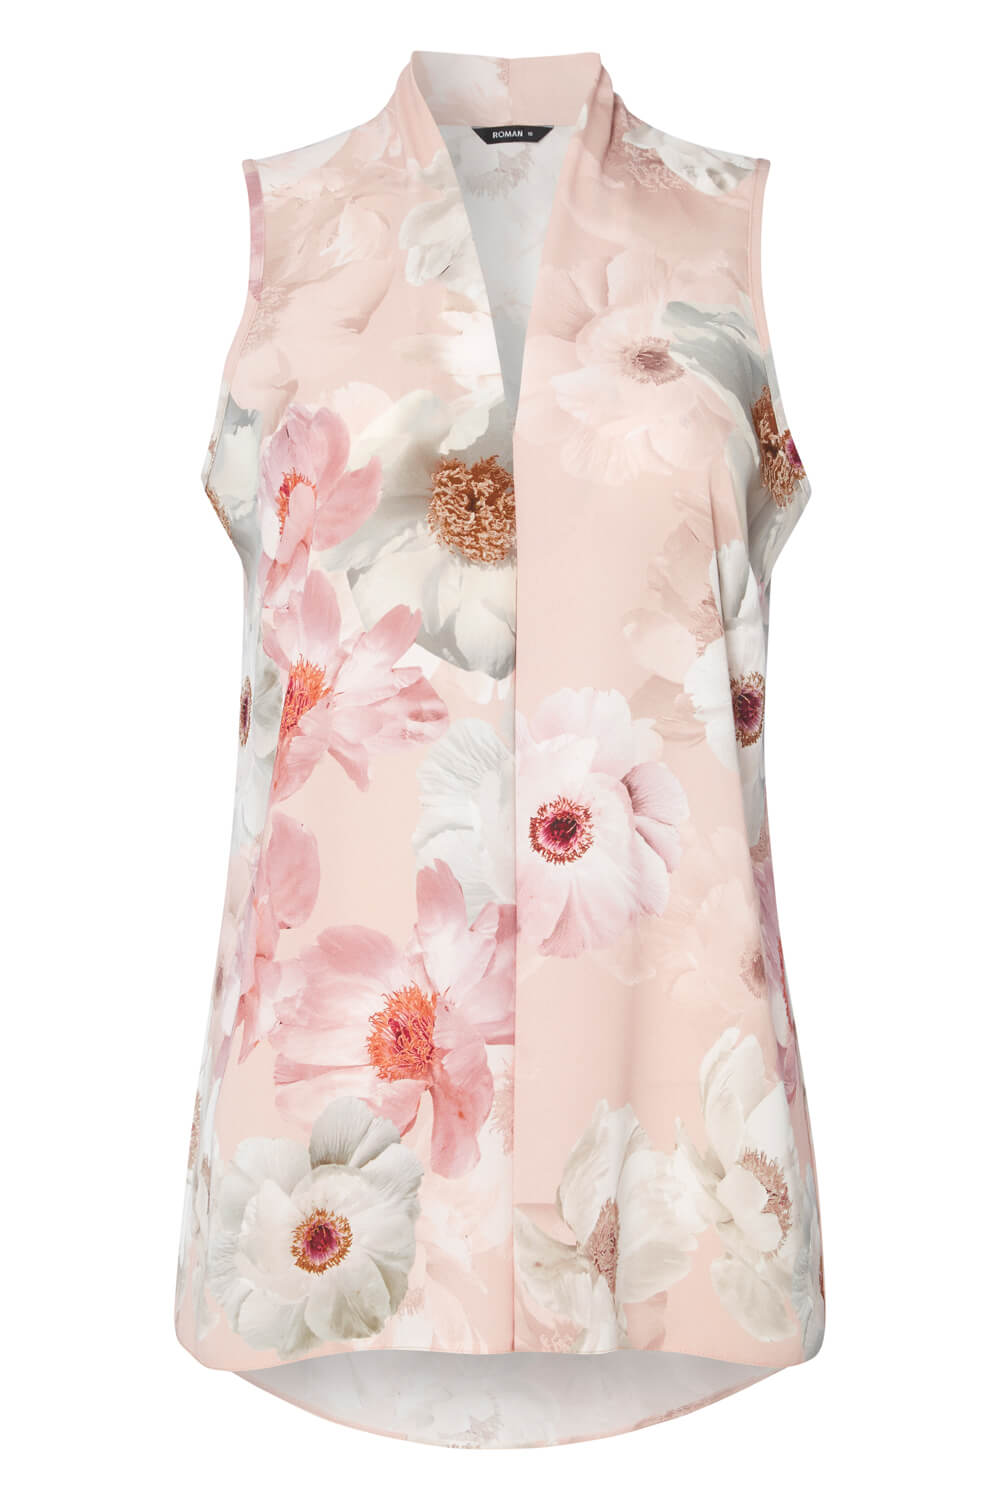 Light Pink Floral Print Pleat Top, Image 4 of 4